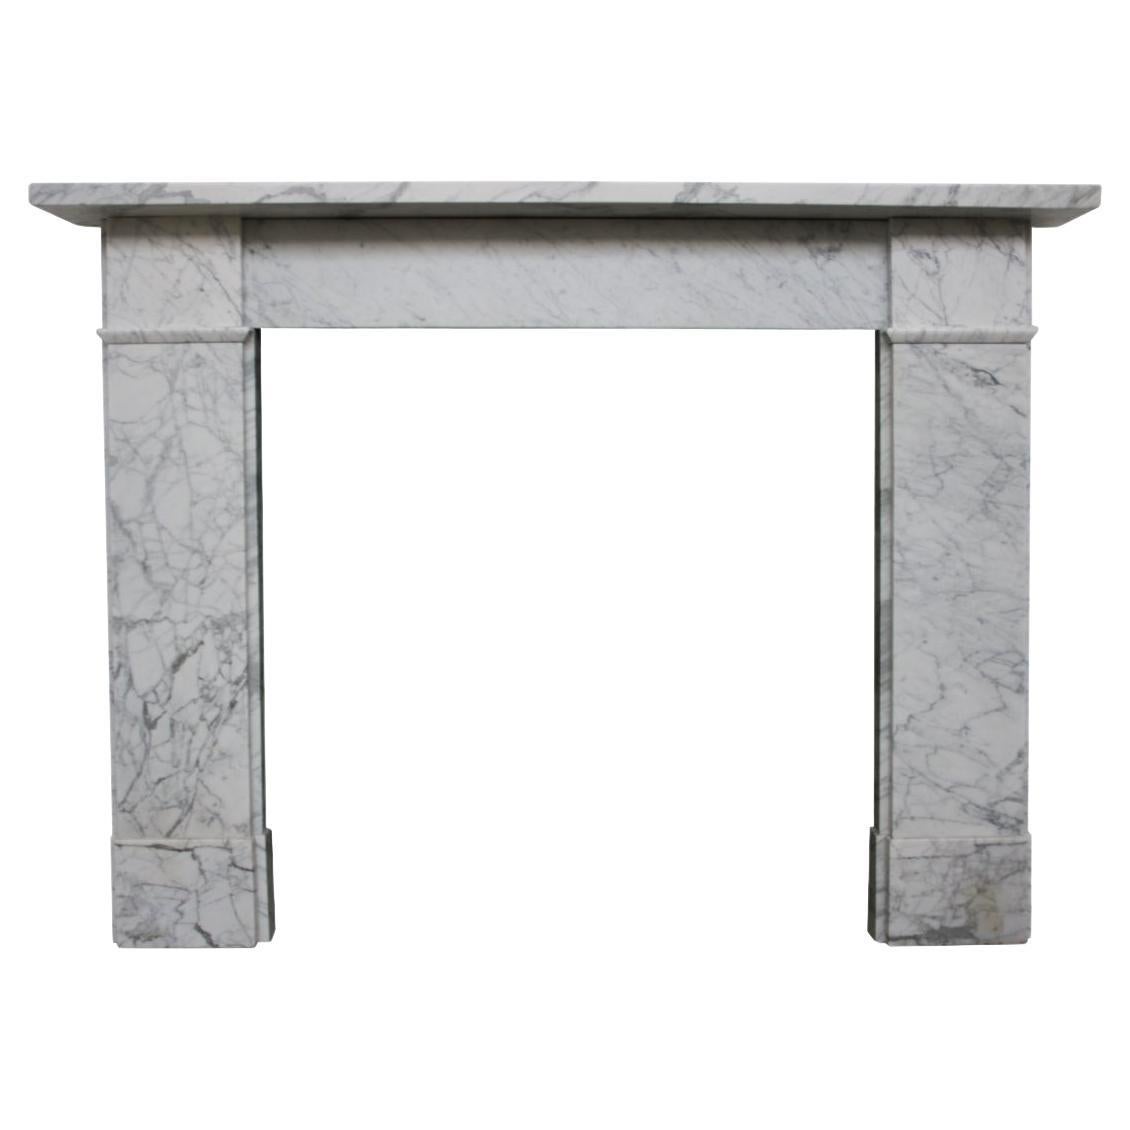 Antique Mid Victorian Carrara Marble Fireplace Surround